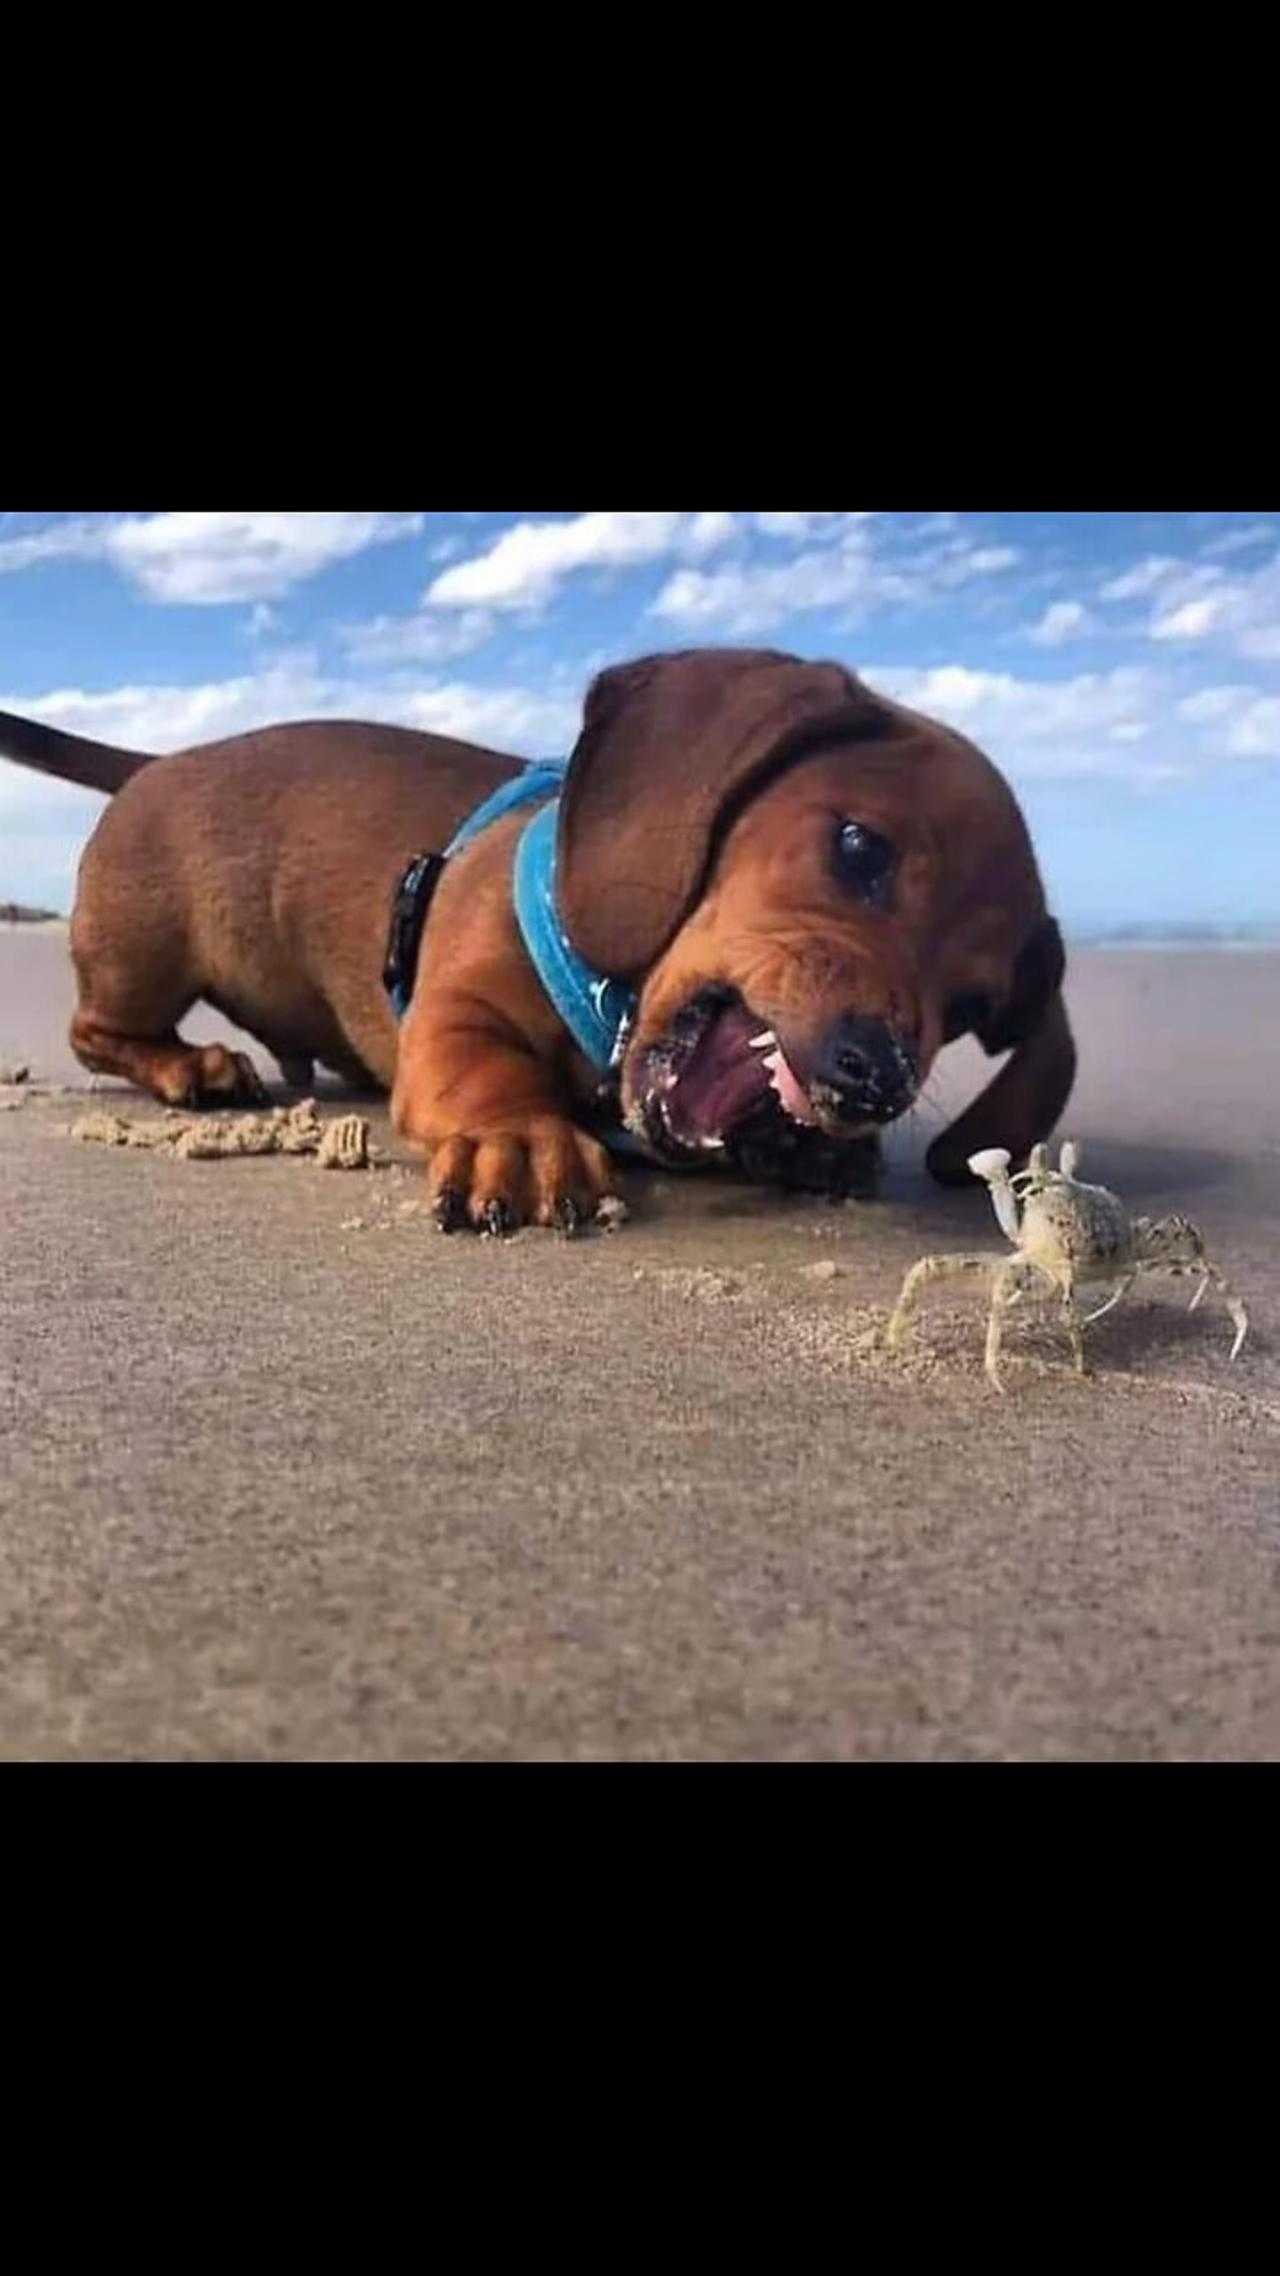 "Hot Moments With Dogs: When They Play With Crabs".